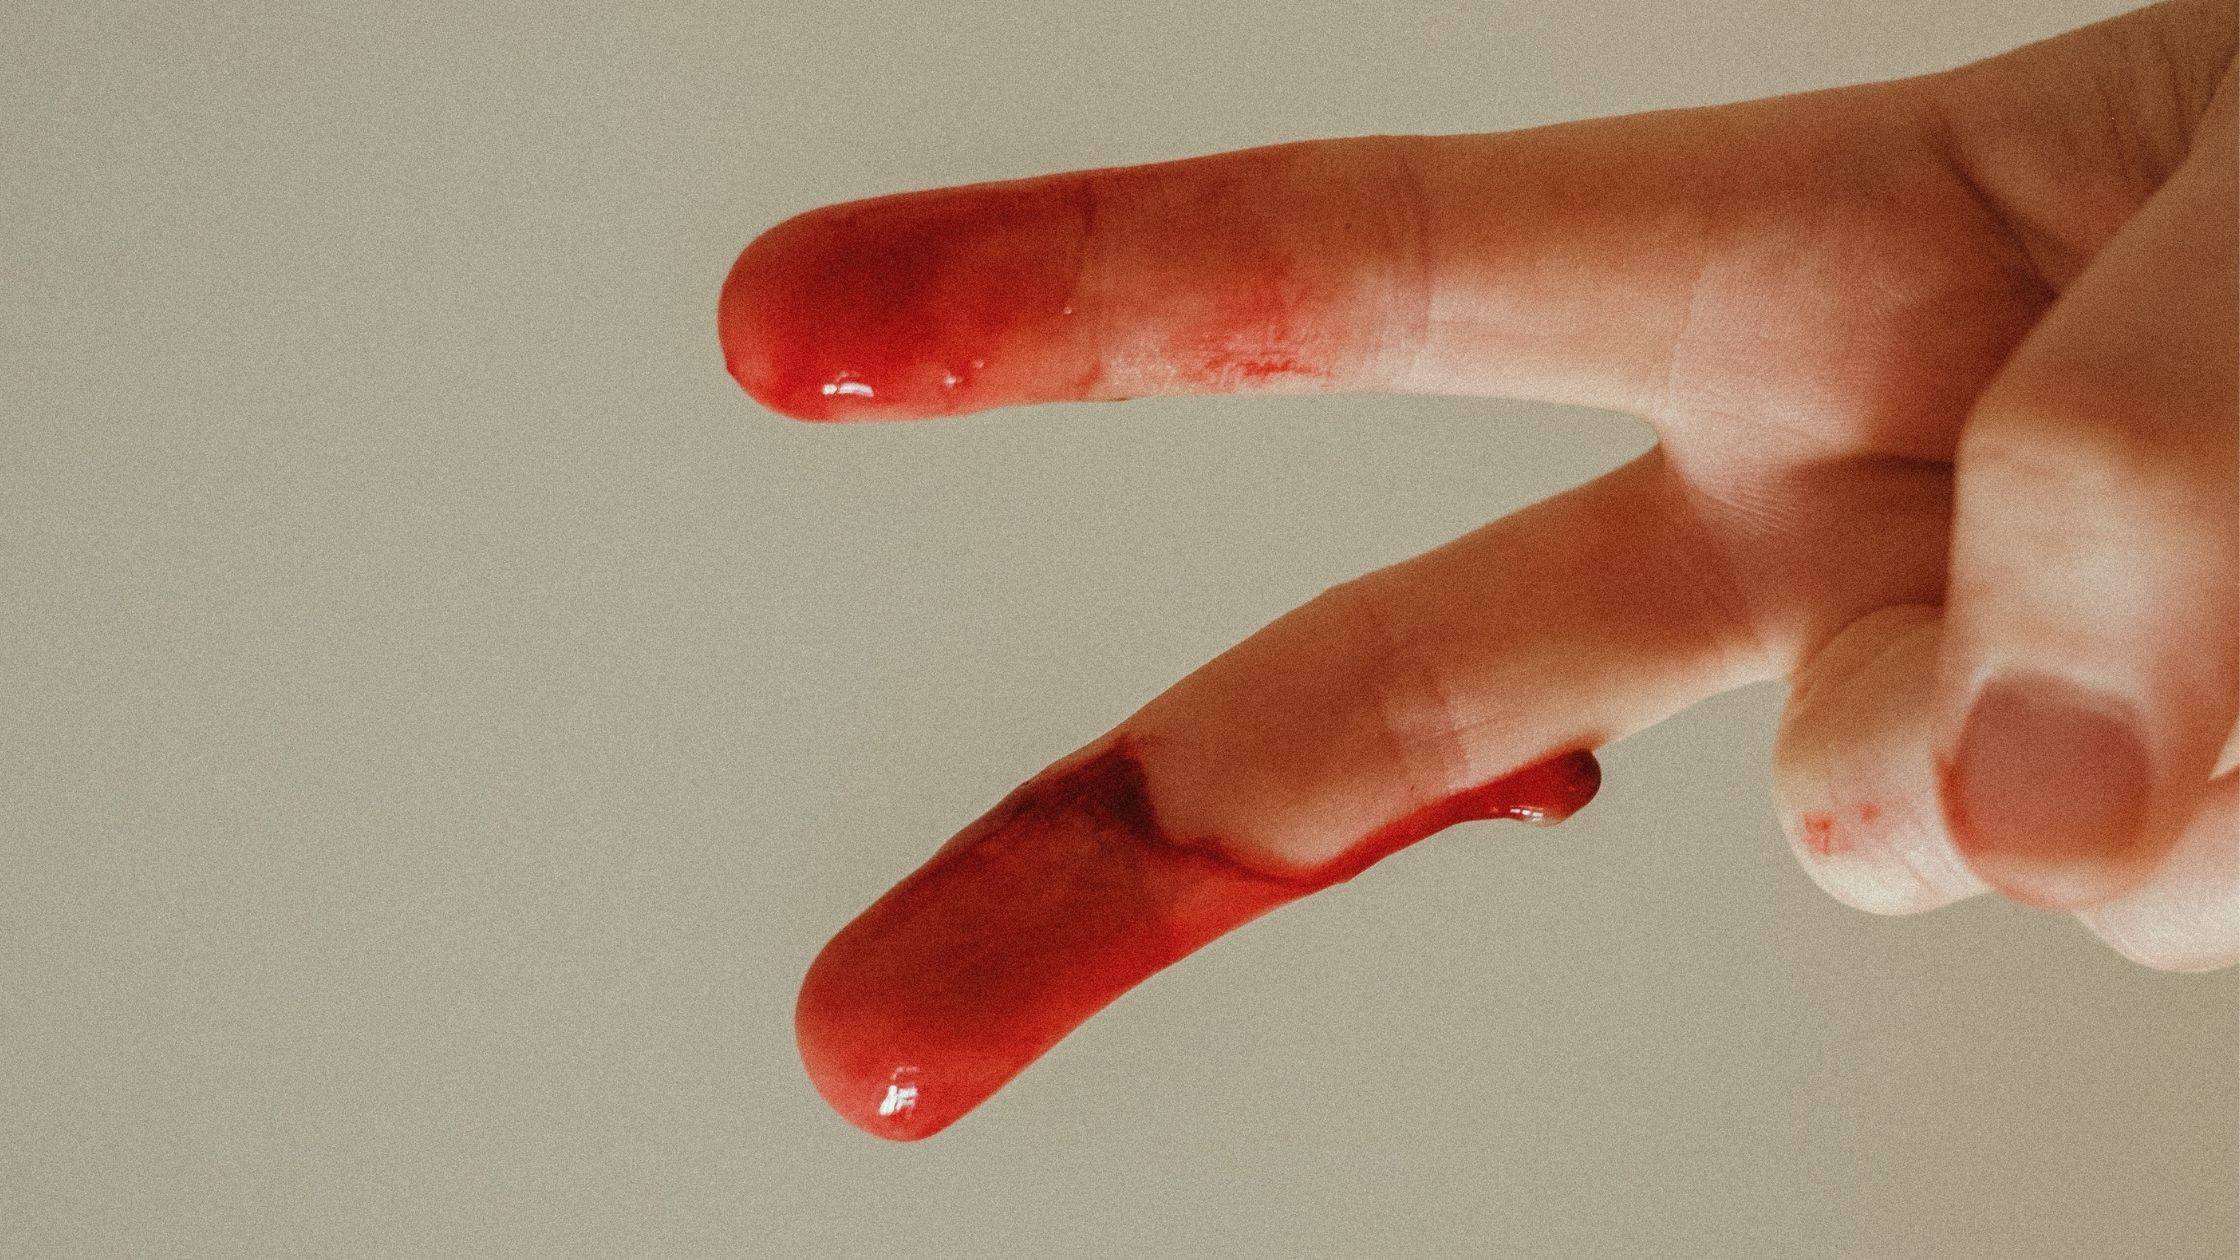 What does dried blood smell like? - Quora